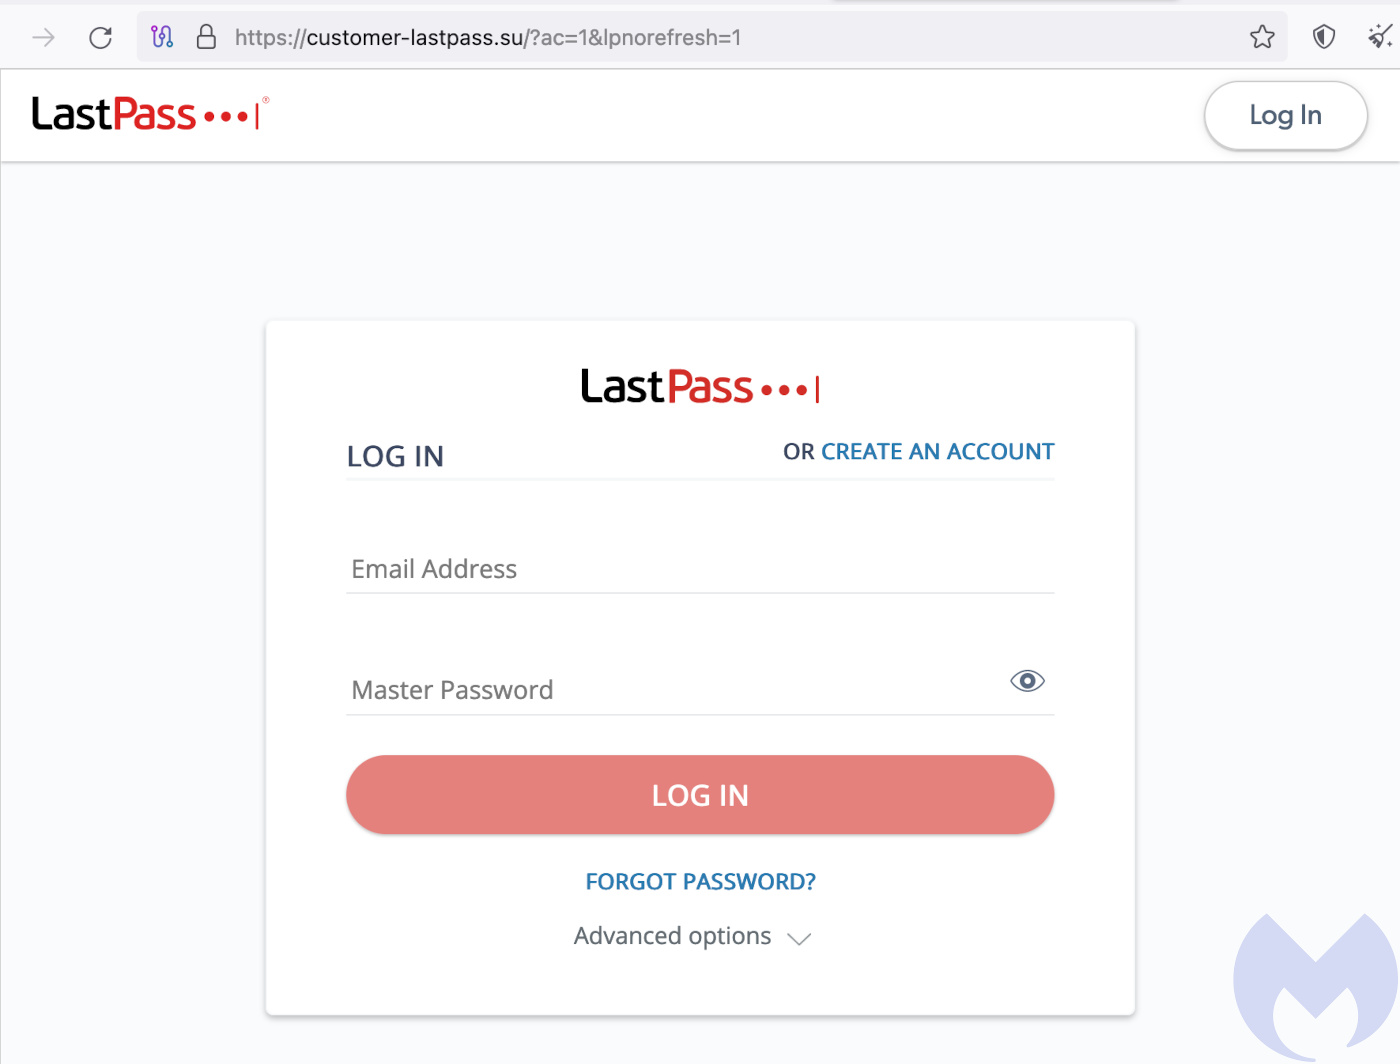 LastPass phishing page asks for username and password